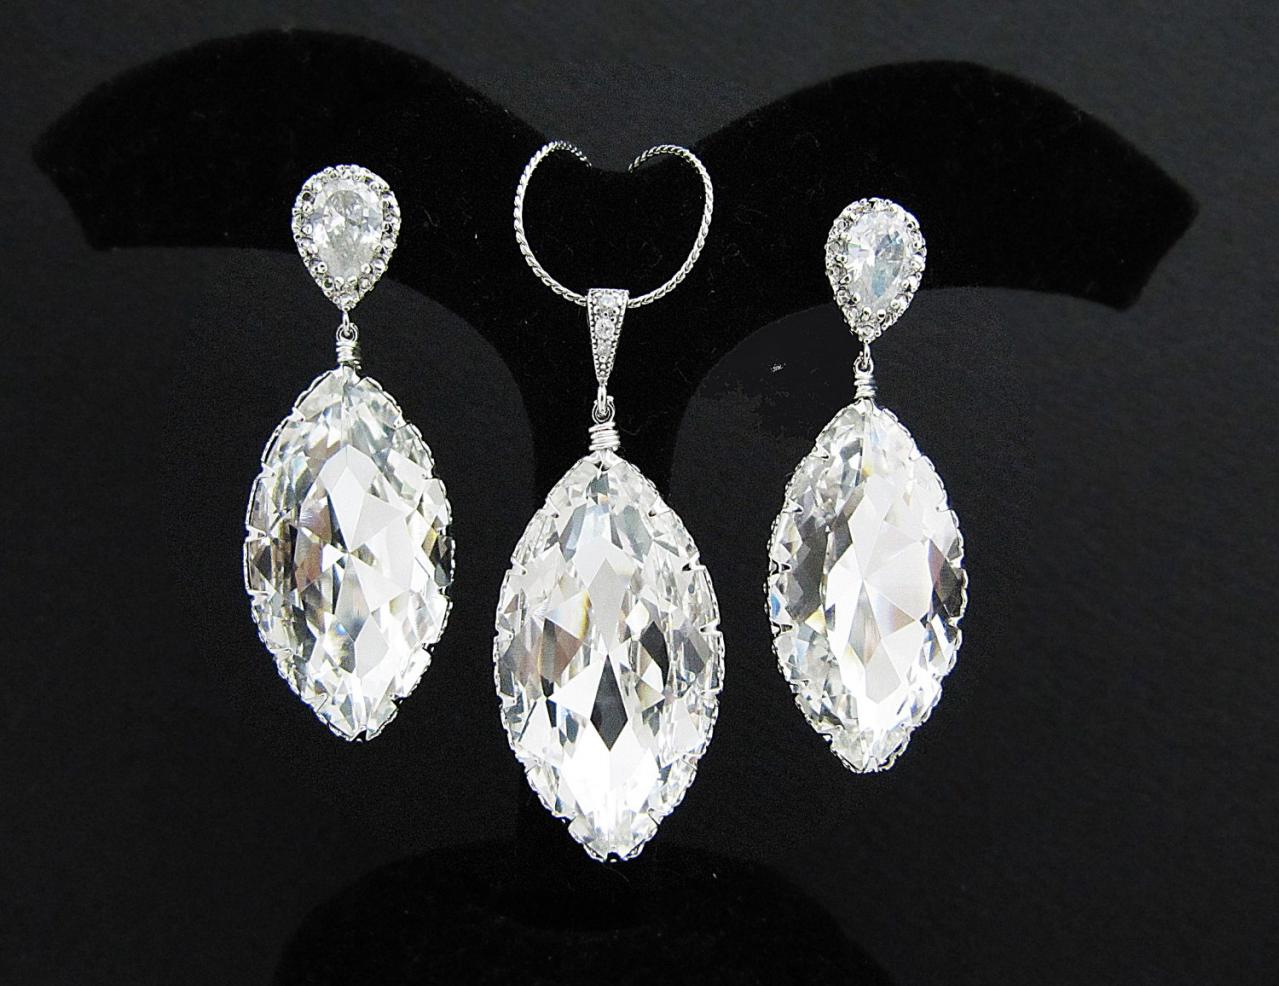 Clear White Swarovski Crystal Navette Drops Bridal Necklace And Earrings Jewelry Set